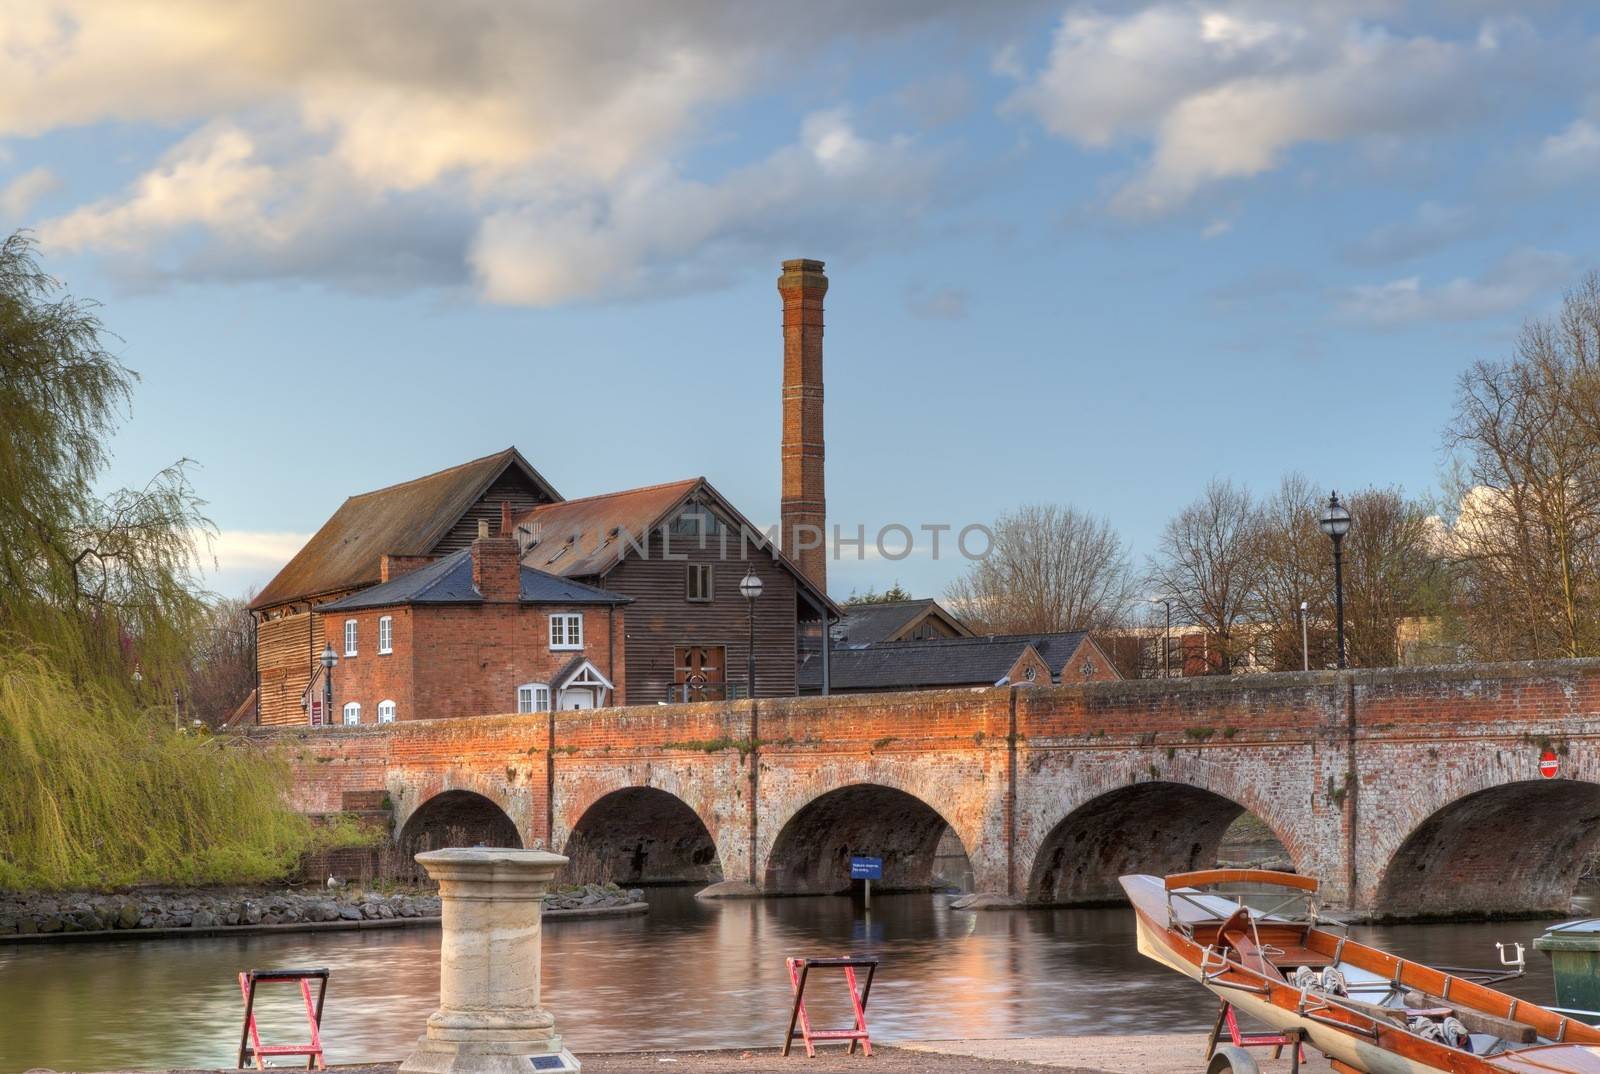 The old mill saw mill and foot bridge, Stratford upon Avon, Warwickshire, England.